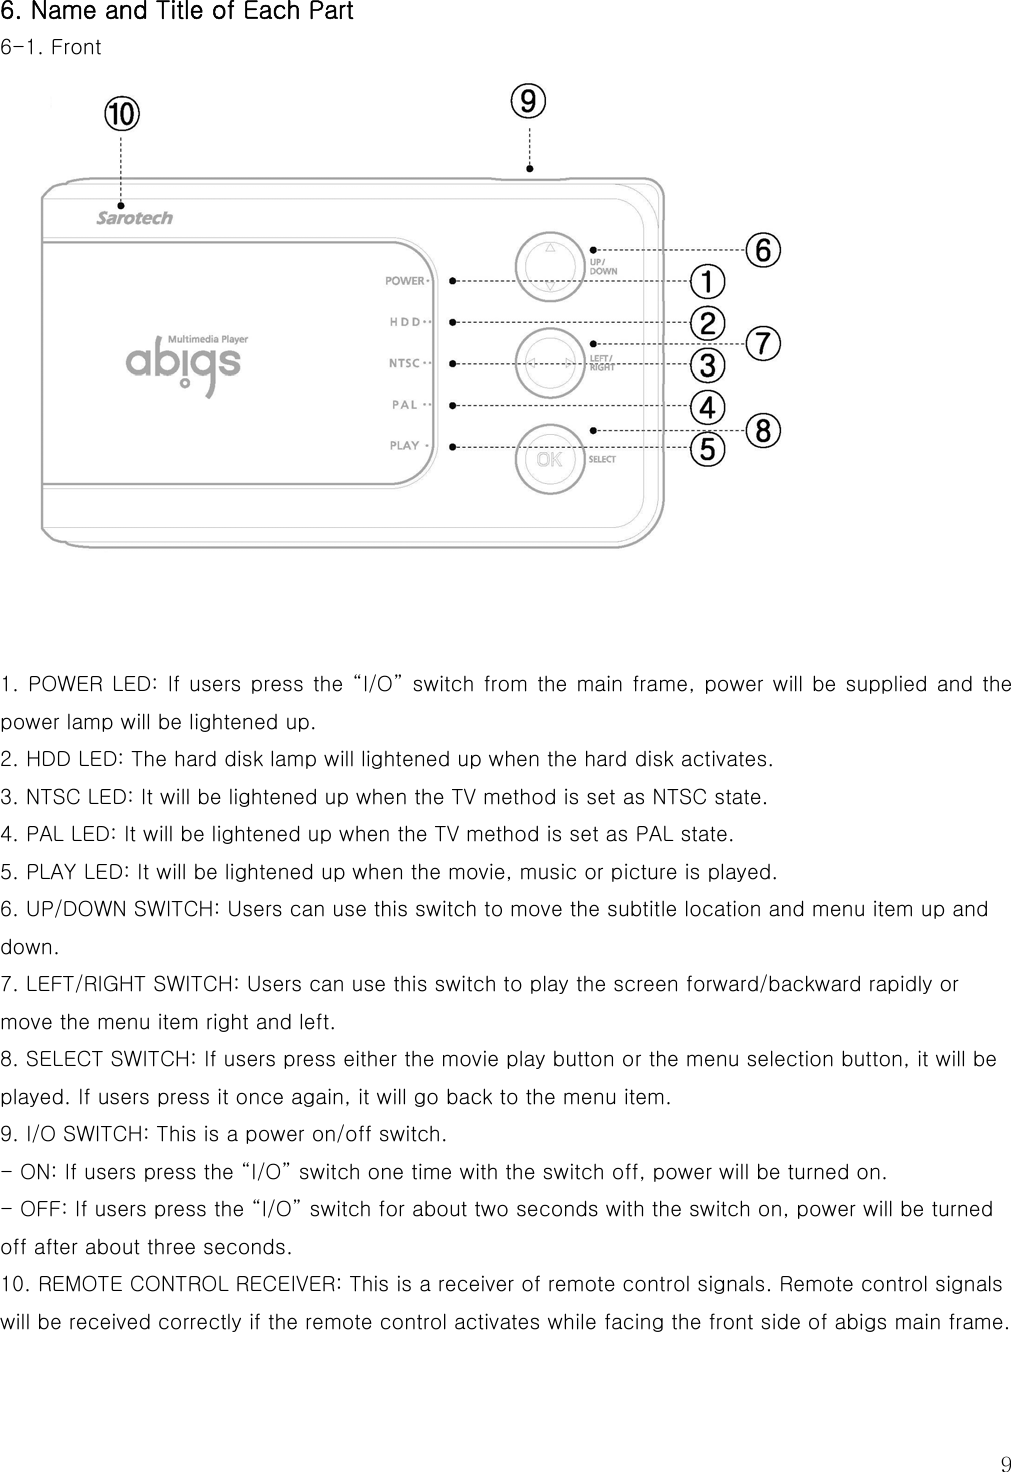   9 6. Name and Title of Each Part 6-1. Front  1. POWER LED: If users press the “I/O” switch from the main frame, power will be supplied and the power lamp will be lightened up.   2. HDD LED: The hard disk lamp will lightened up when the hard disk activates. 3. NTSC LED: It will be lightened up when the TV method is set as NTSC state. 4. PAL LED: It will be lightened up when the TV method is set as PAL state. 5. PLAY LED: It will be lightened up when the movie, music or picture is played. 6. UP/DOWN SWITCH: Users can use this switch to move the subtitle location and menu item up and down.   7. LEFT/RIGHT SWITCH: Users can use this switch to play the screen forward/backward rapidly or move the menu item right and left. 8. SELECT SWITCH: If users press either the movie play button or the menu selection button, it will be played. If users press it once again, it will go back to the menu item. 9. I/O SWITCH: This is a power on/off switch. - ON: If users press the “I/O” switch one time with the switch off, power will be turned on. - OFF: If users press the “I/O” switch for about two seconds with the switch on, power will be turned off after about three seconds. 10. REMOTE CONTROL RECEIVER: This is a receiver of remote control signals. Remote control signals will be received correctly if the remote control activates while facing the front side of abigs main frame. 